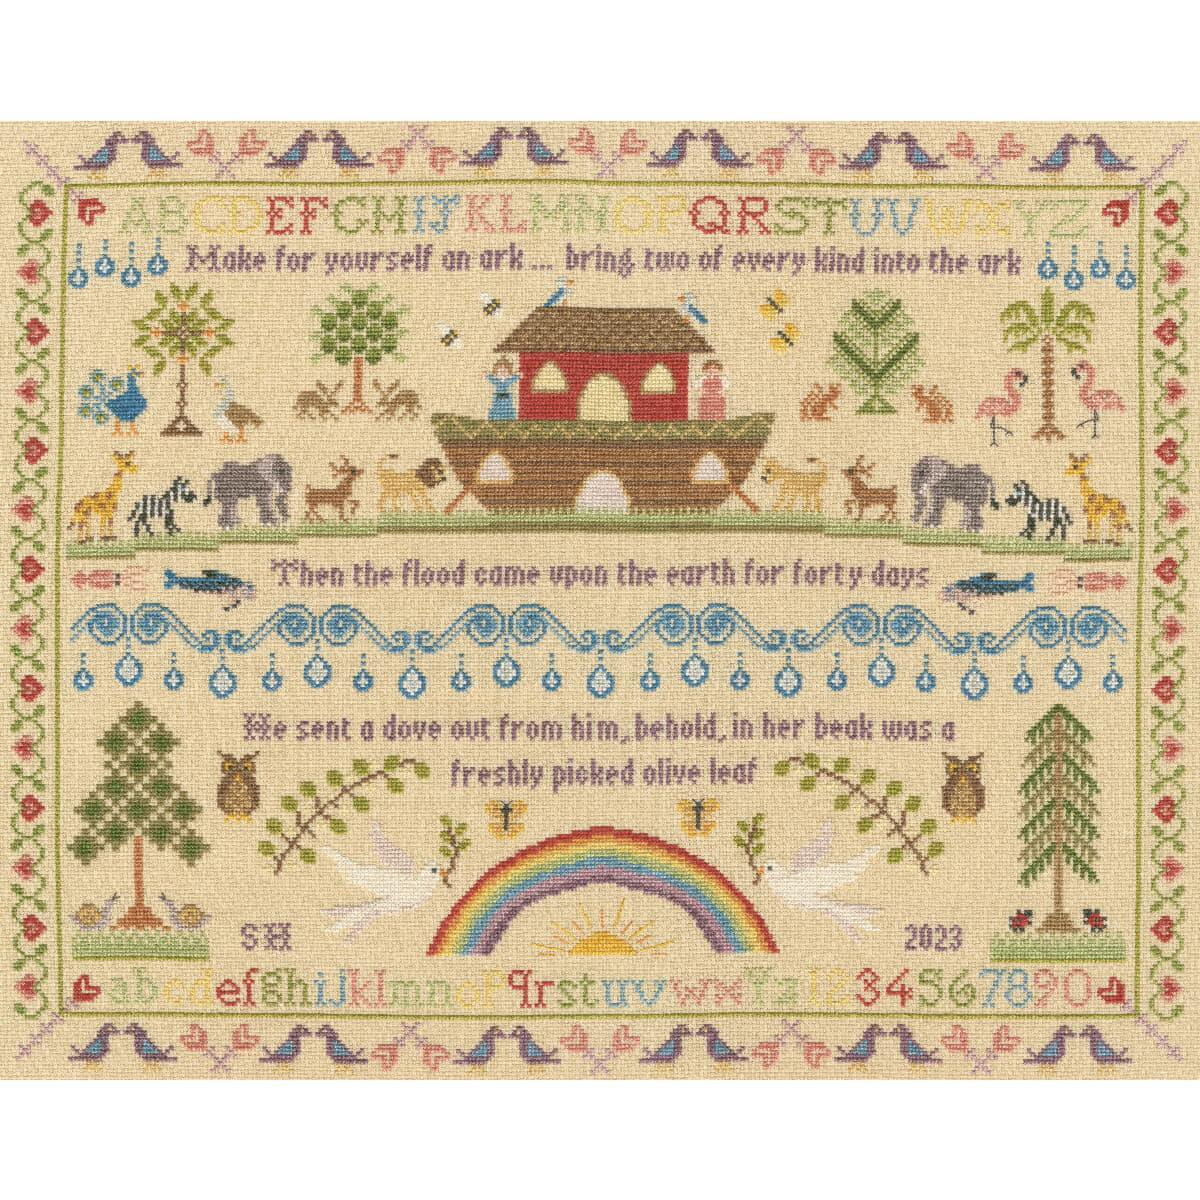 Bothy Threads counted cross stitch kit "Heirloom...